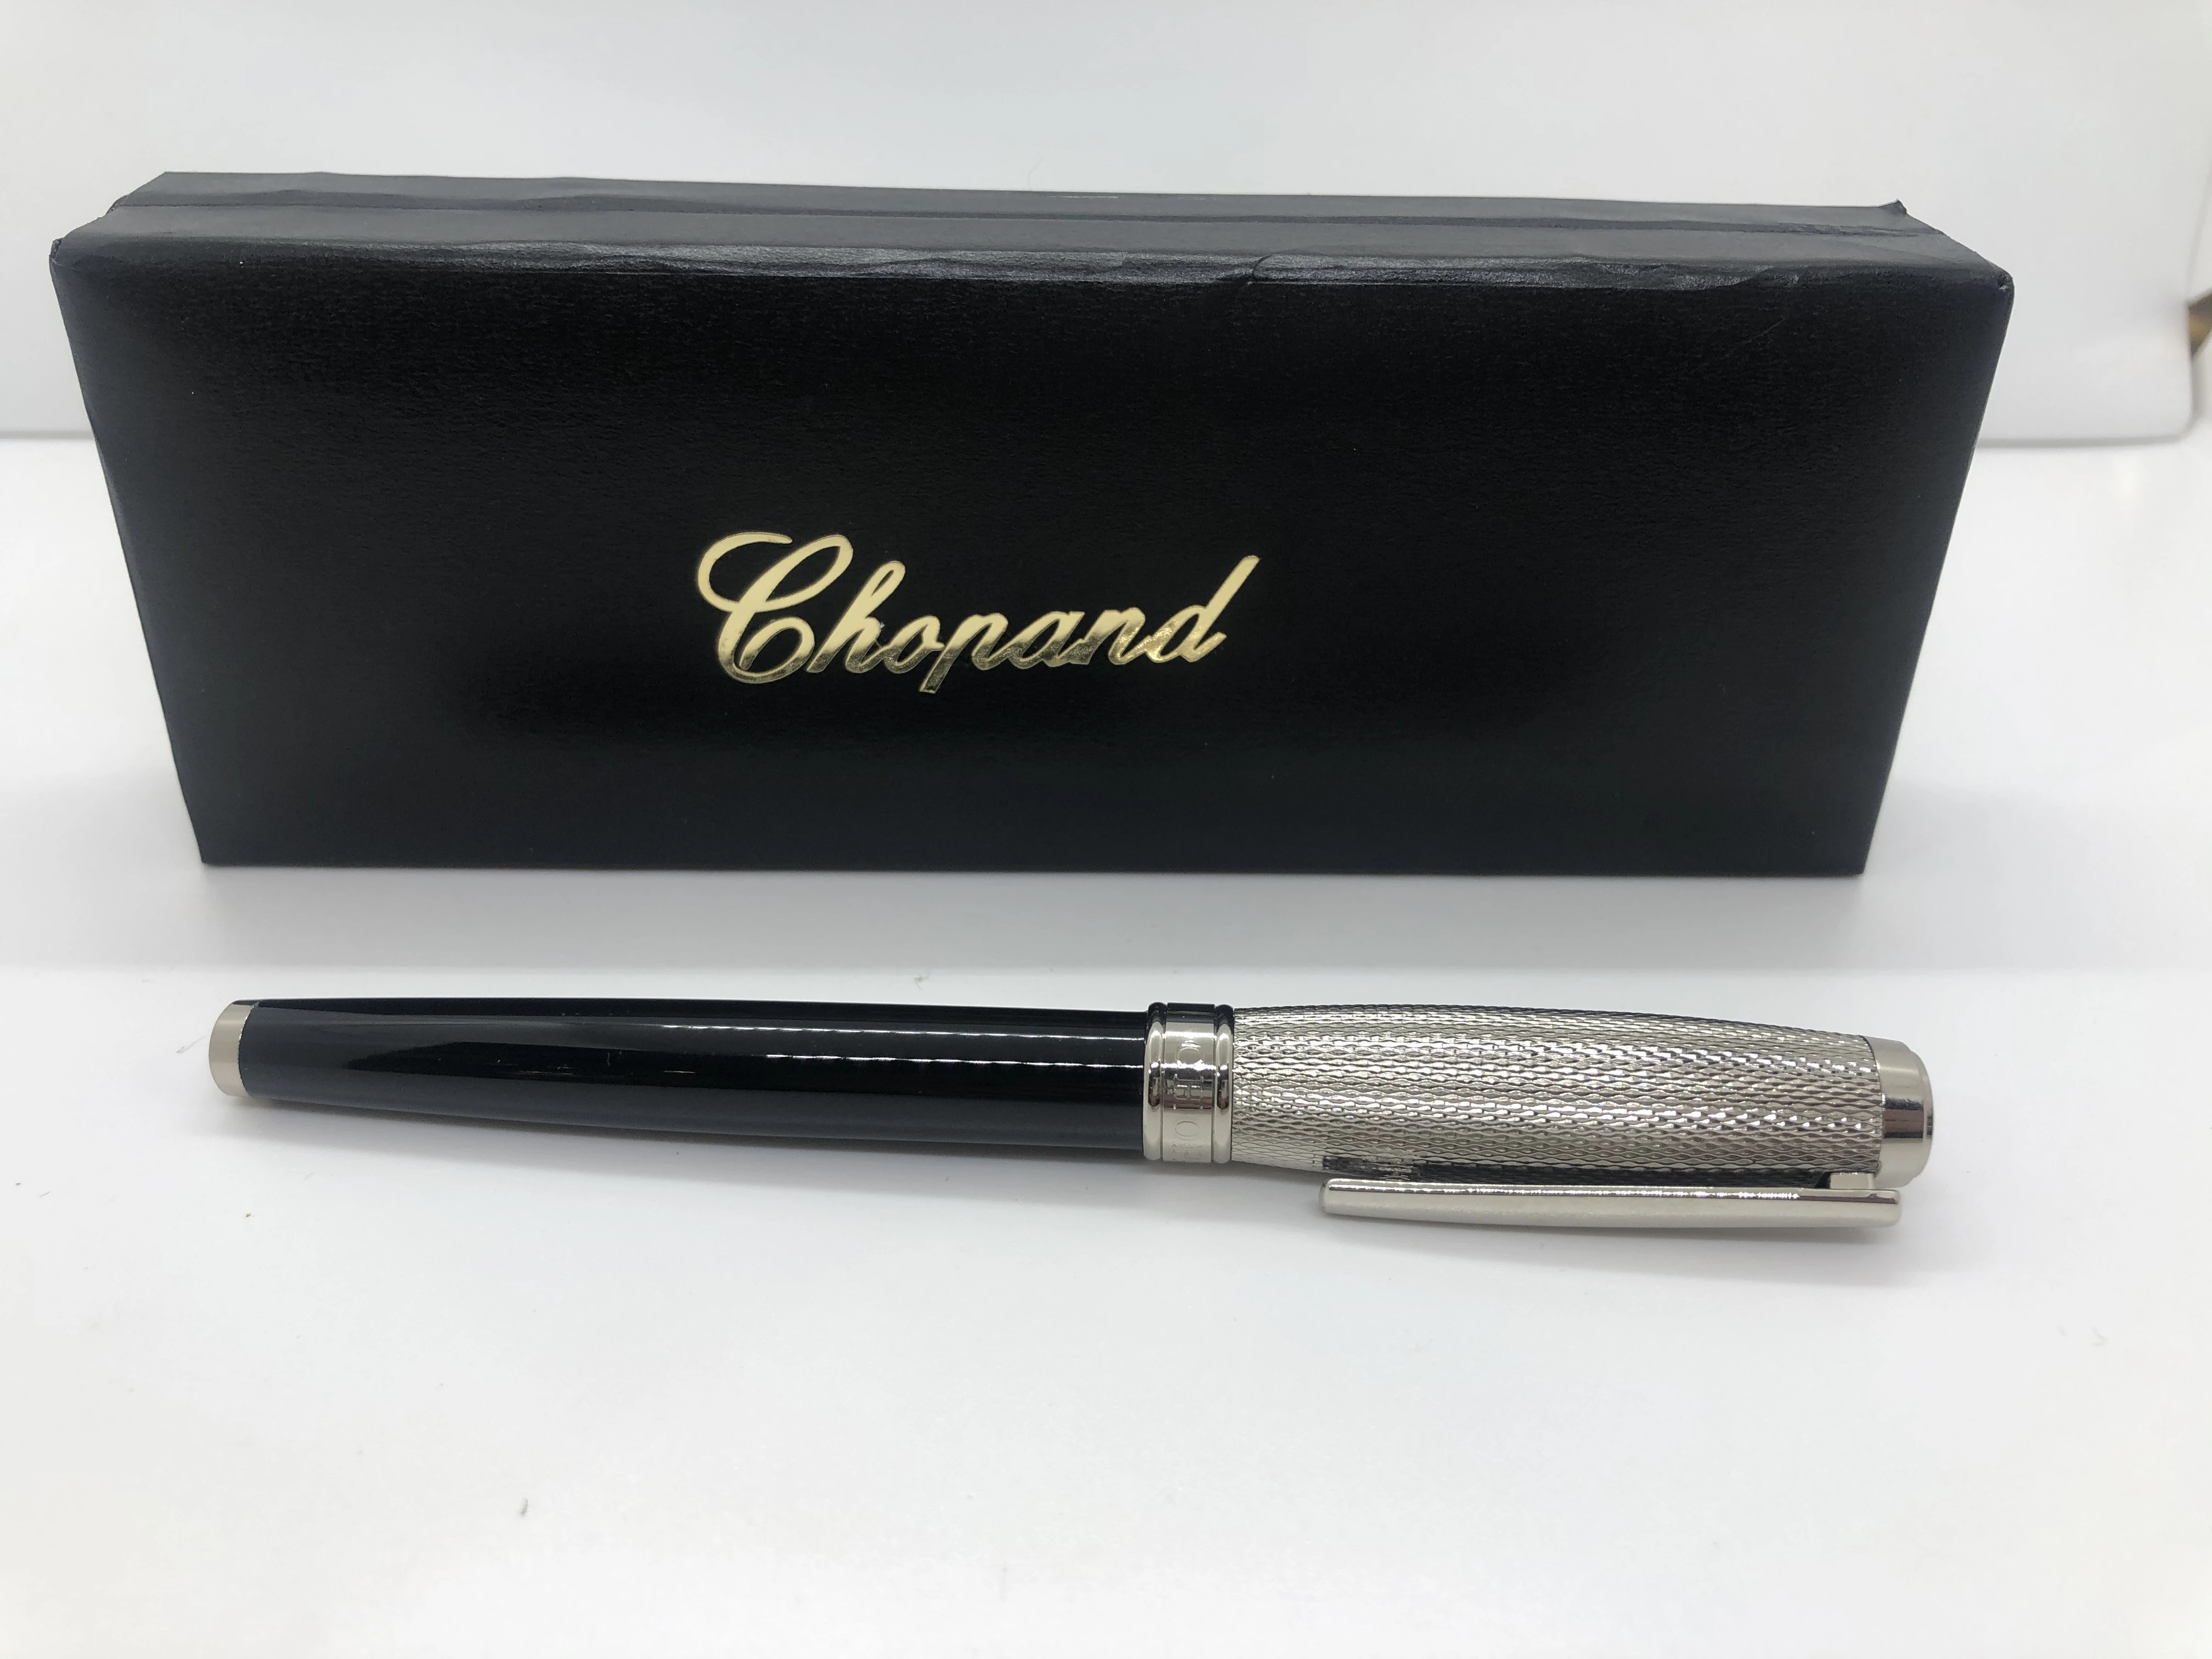 Chopard pen silver * black - with engraved touches - with the brand's logo on top and engraved in the rotation